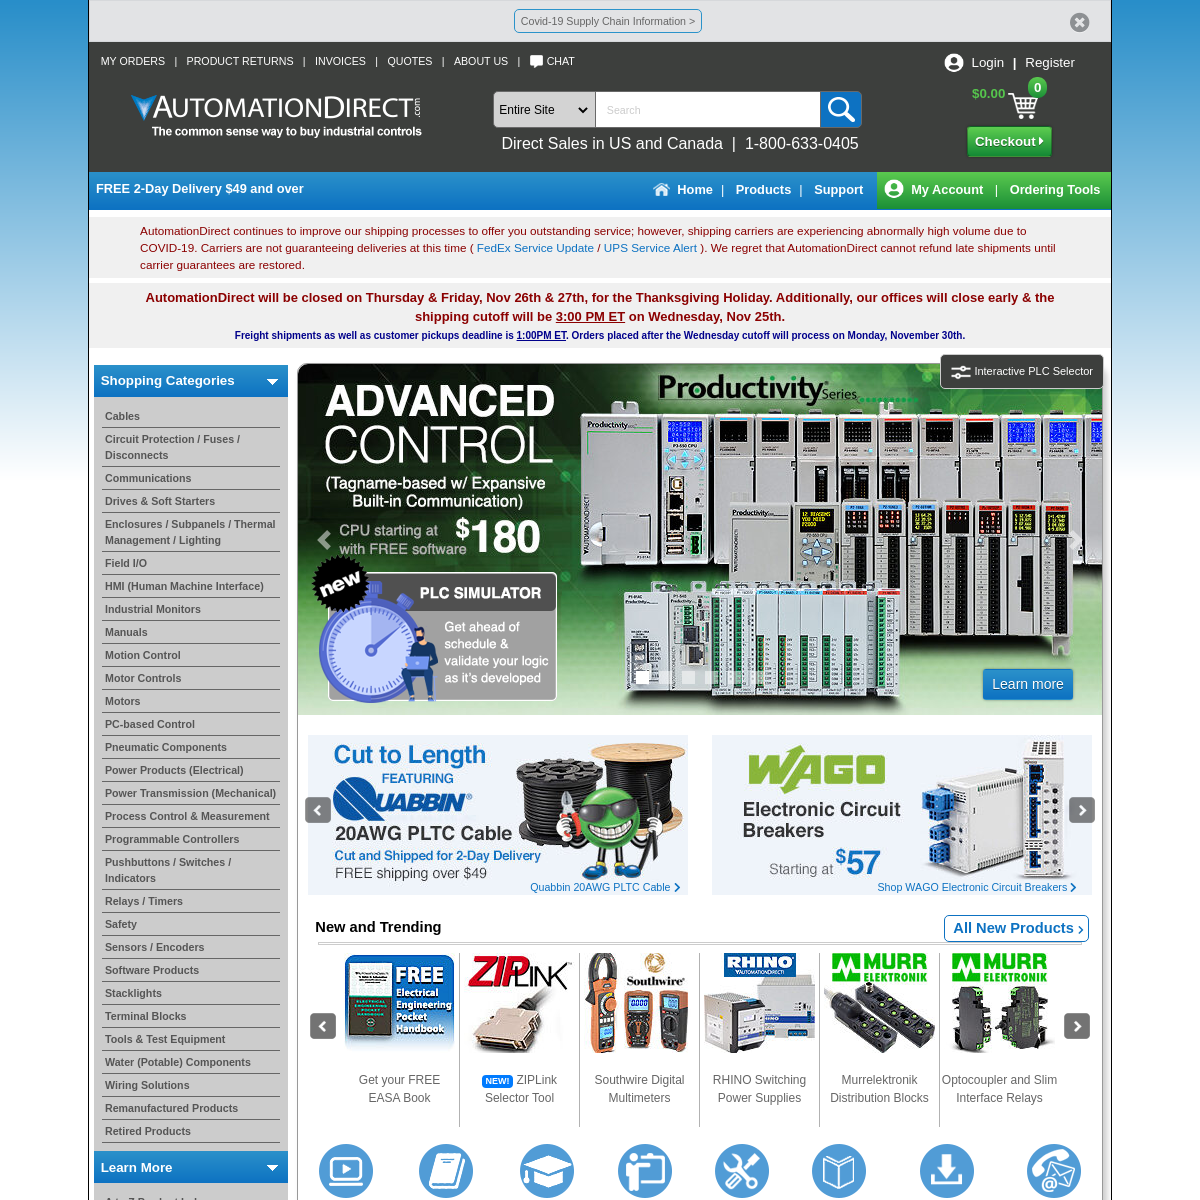 A complete backup of automationdirect.com